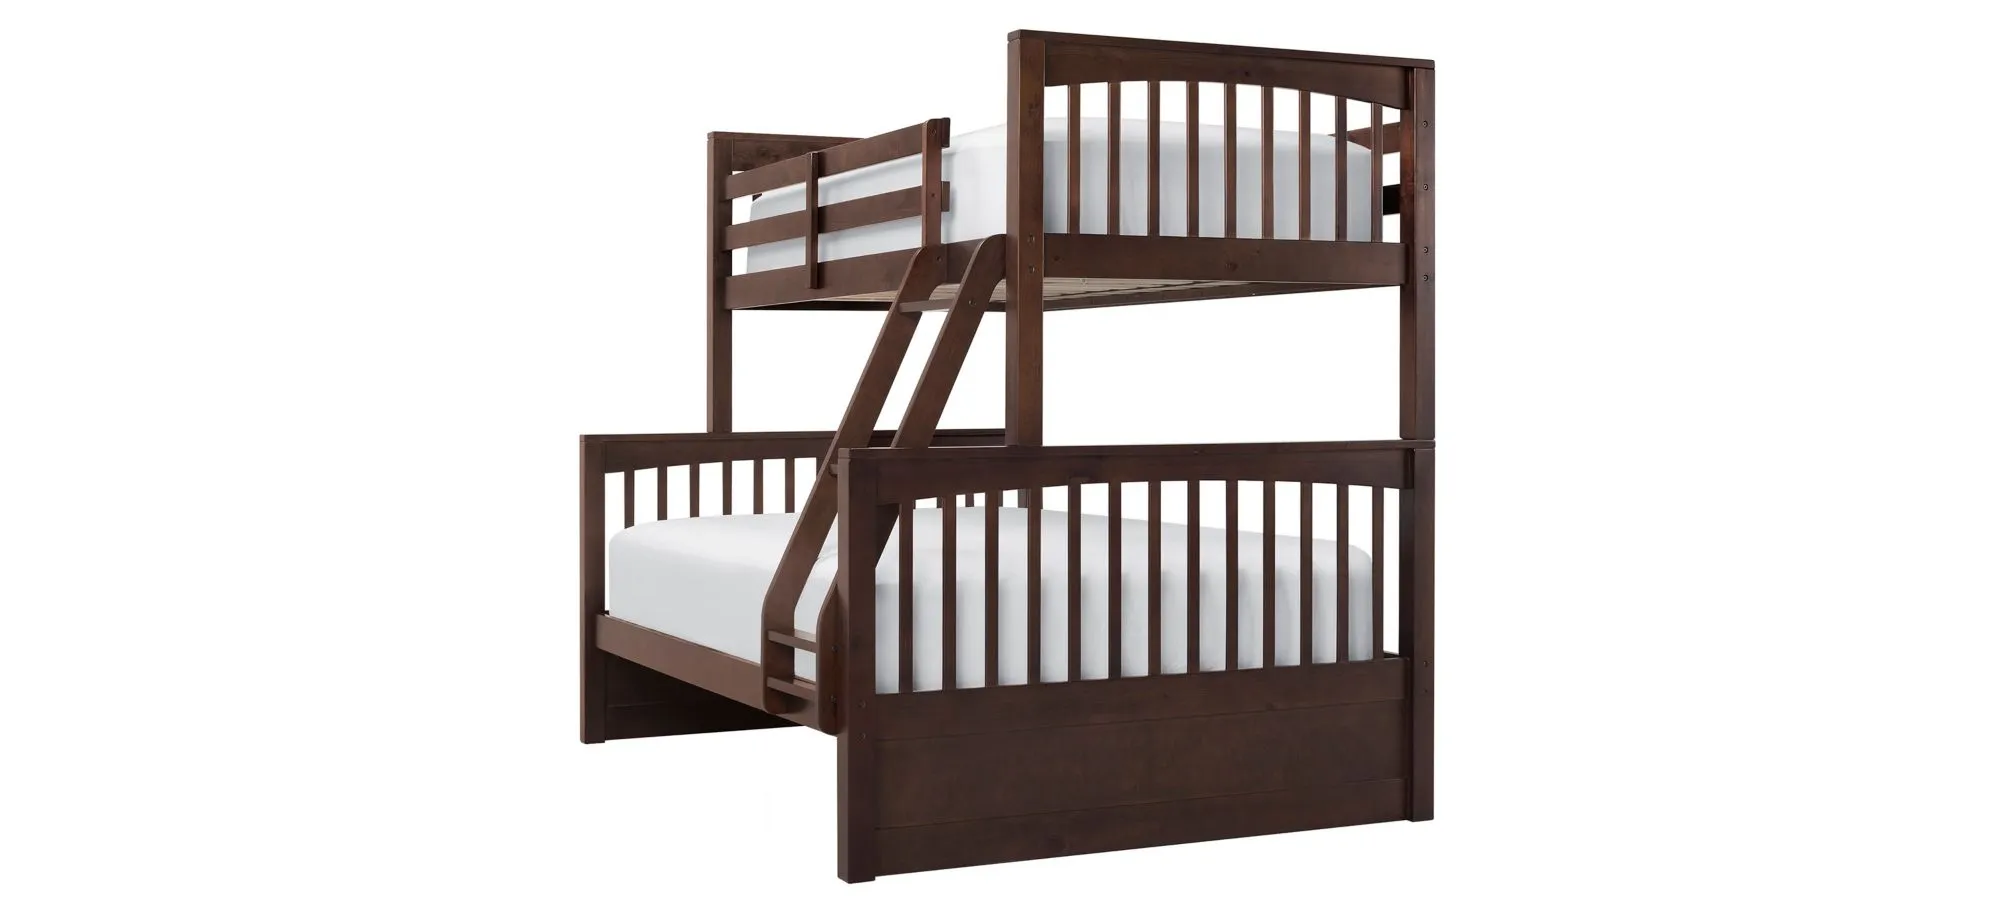 Jordan Twin-Over-Full Bunk Bed in Chocolate by Hillsdale Furniture